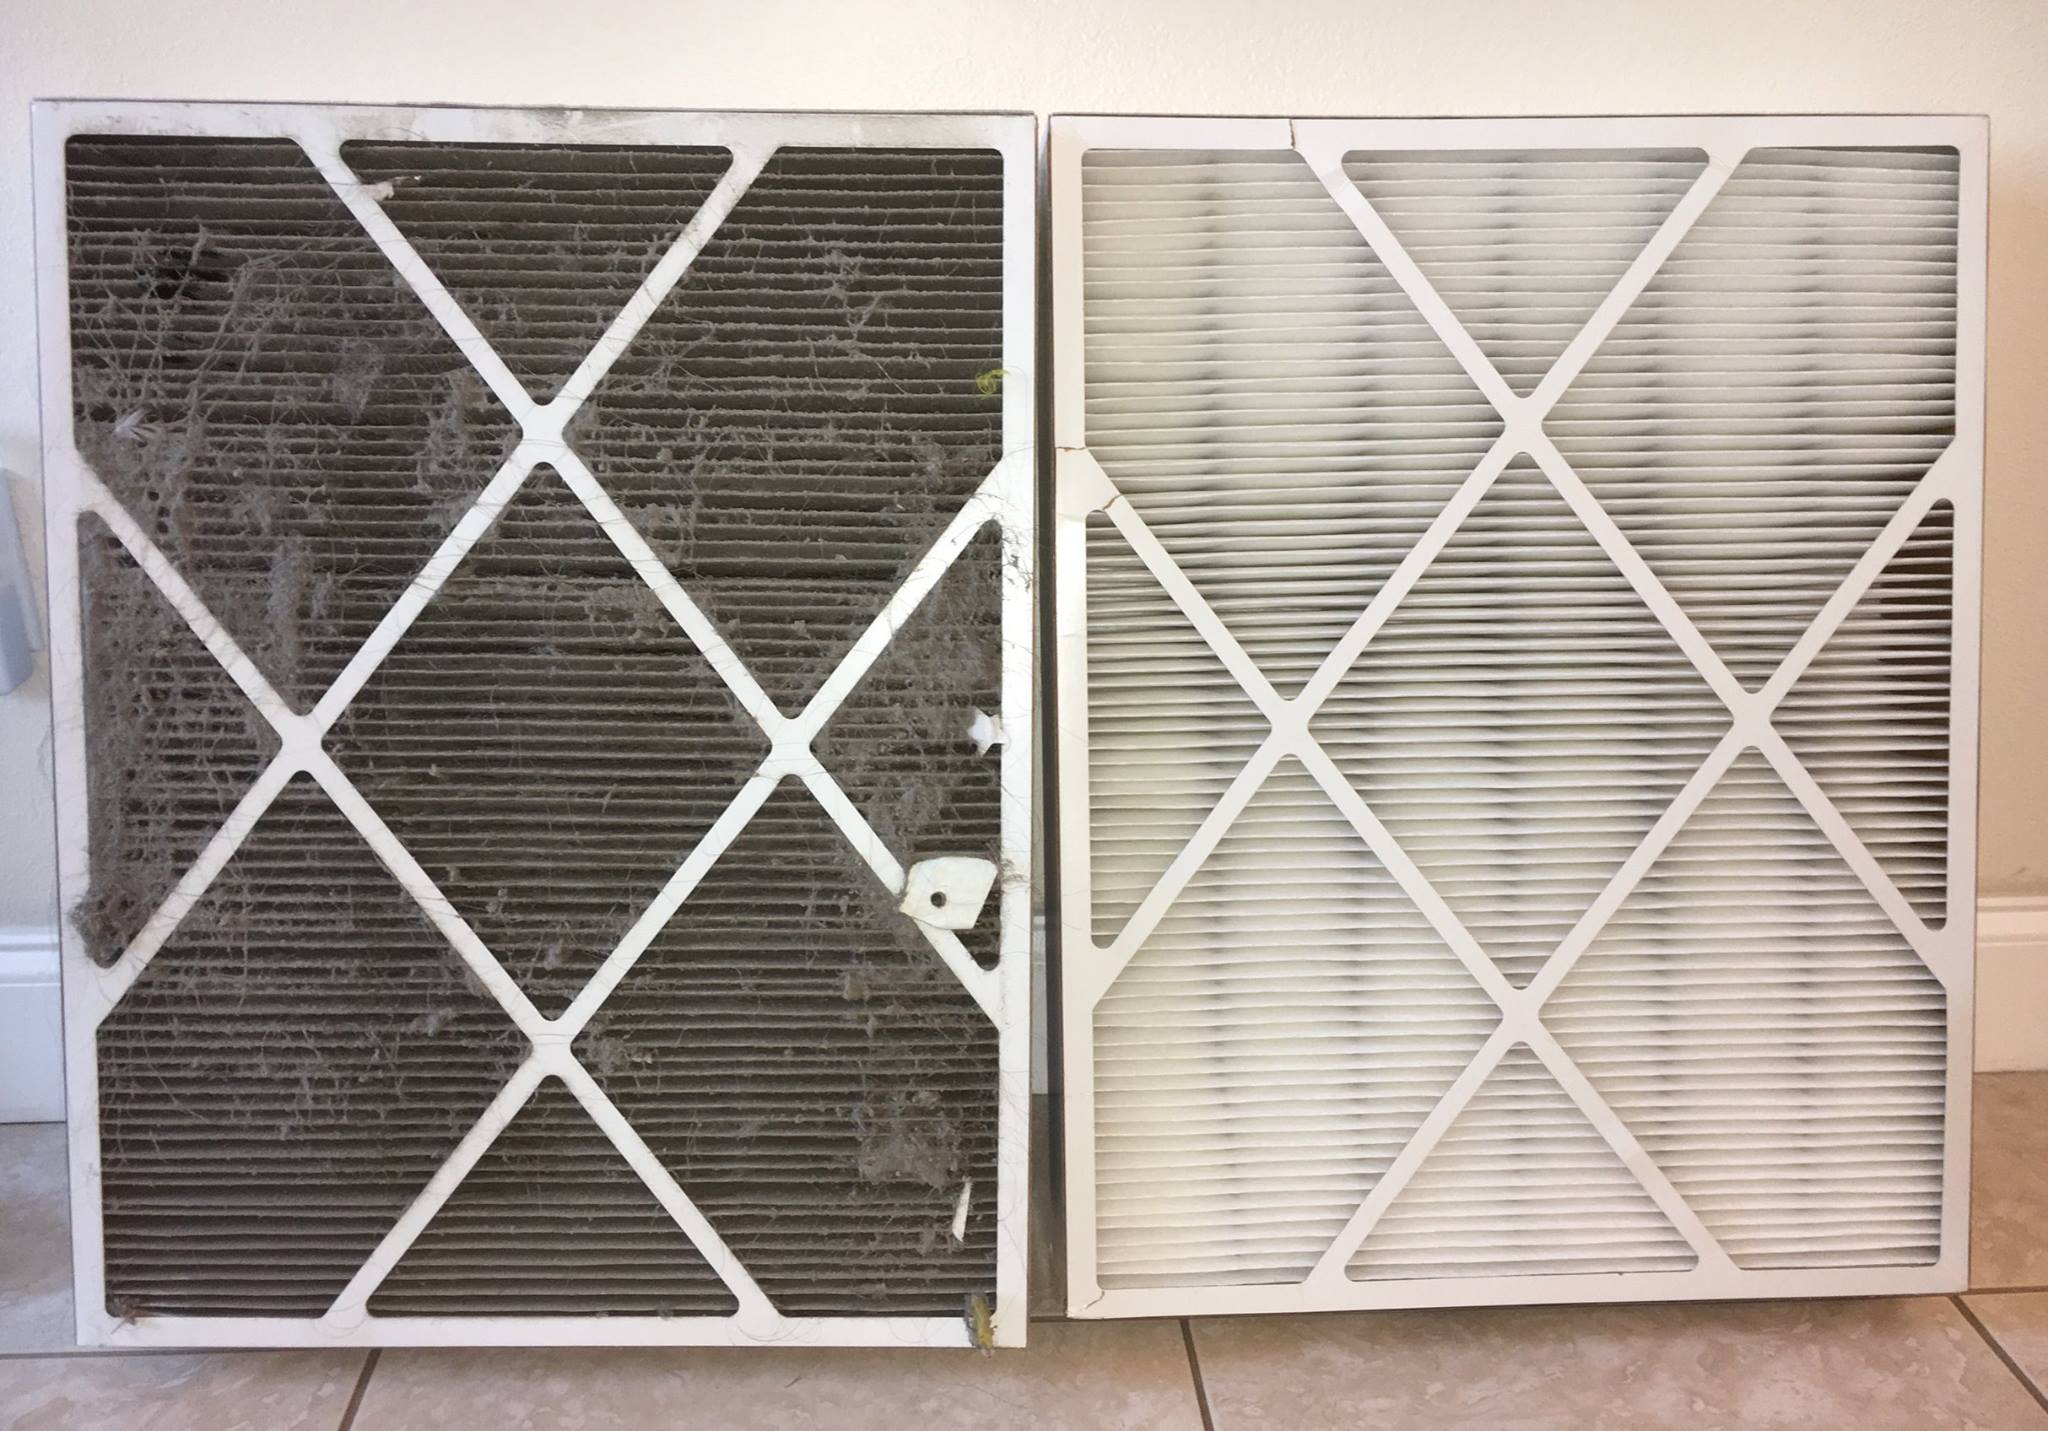 Roseville's Whole-Home Air Filtration Services